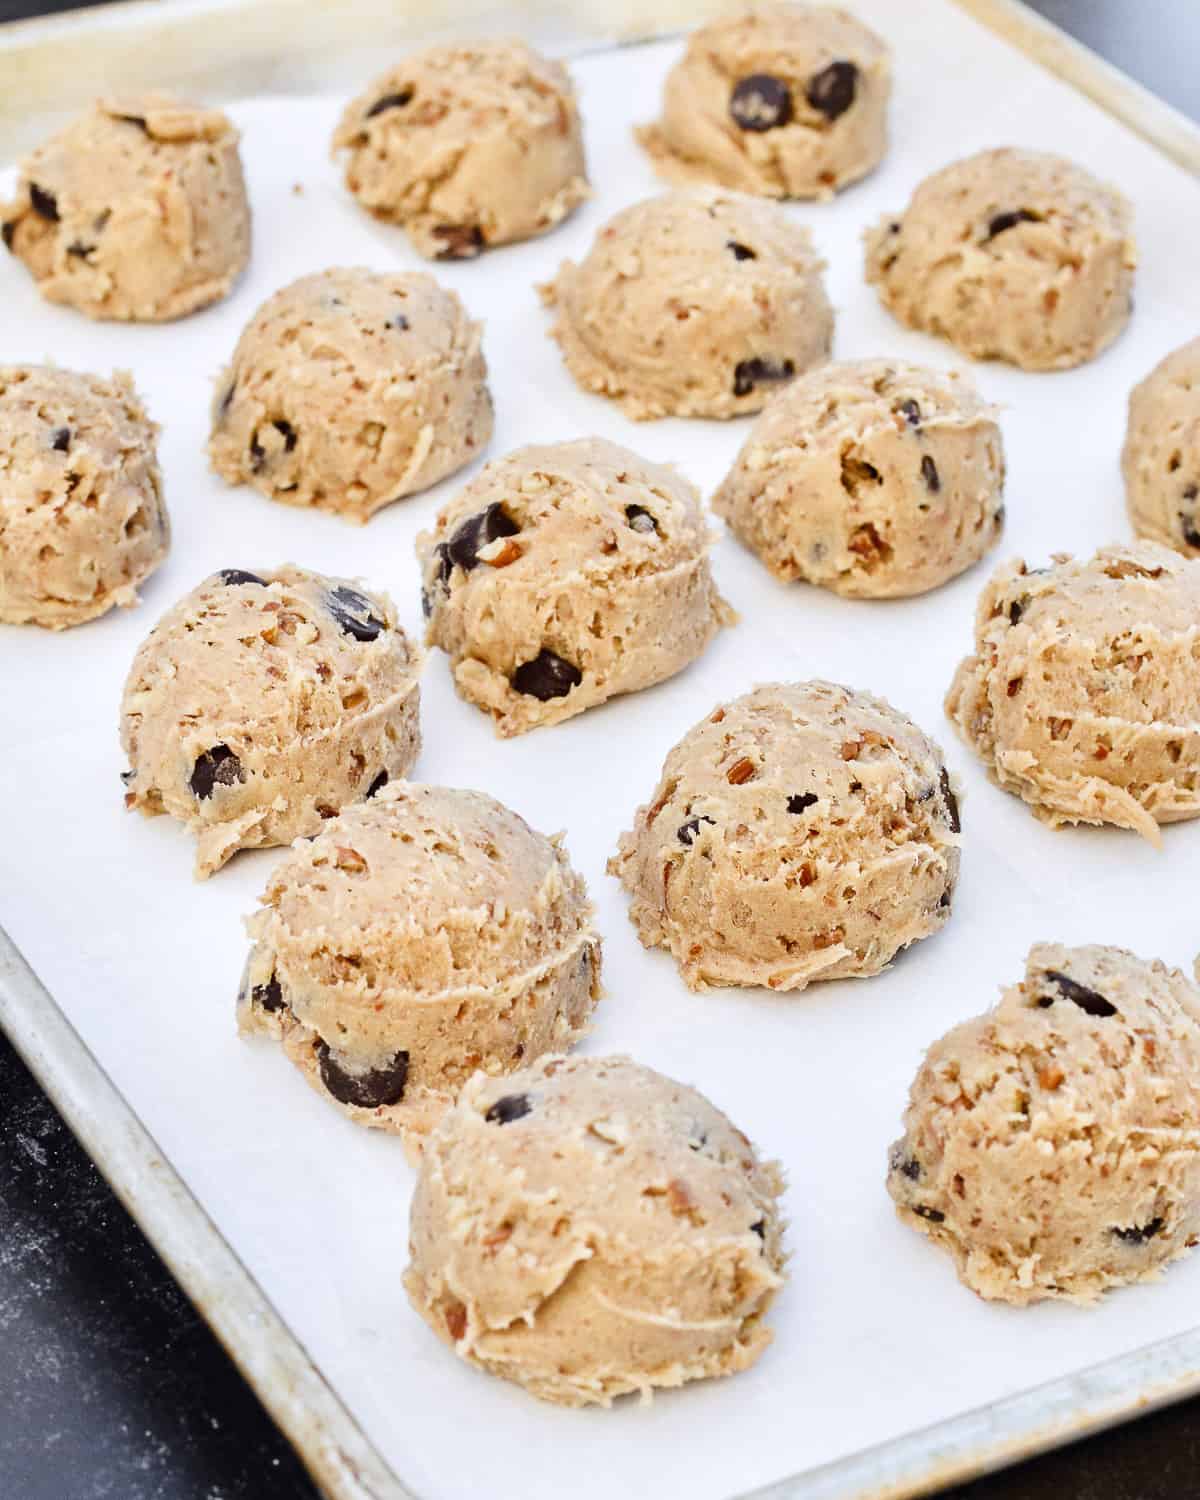 Balls of cookie dough on a lined baking sheet.